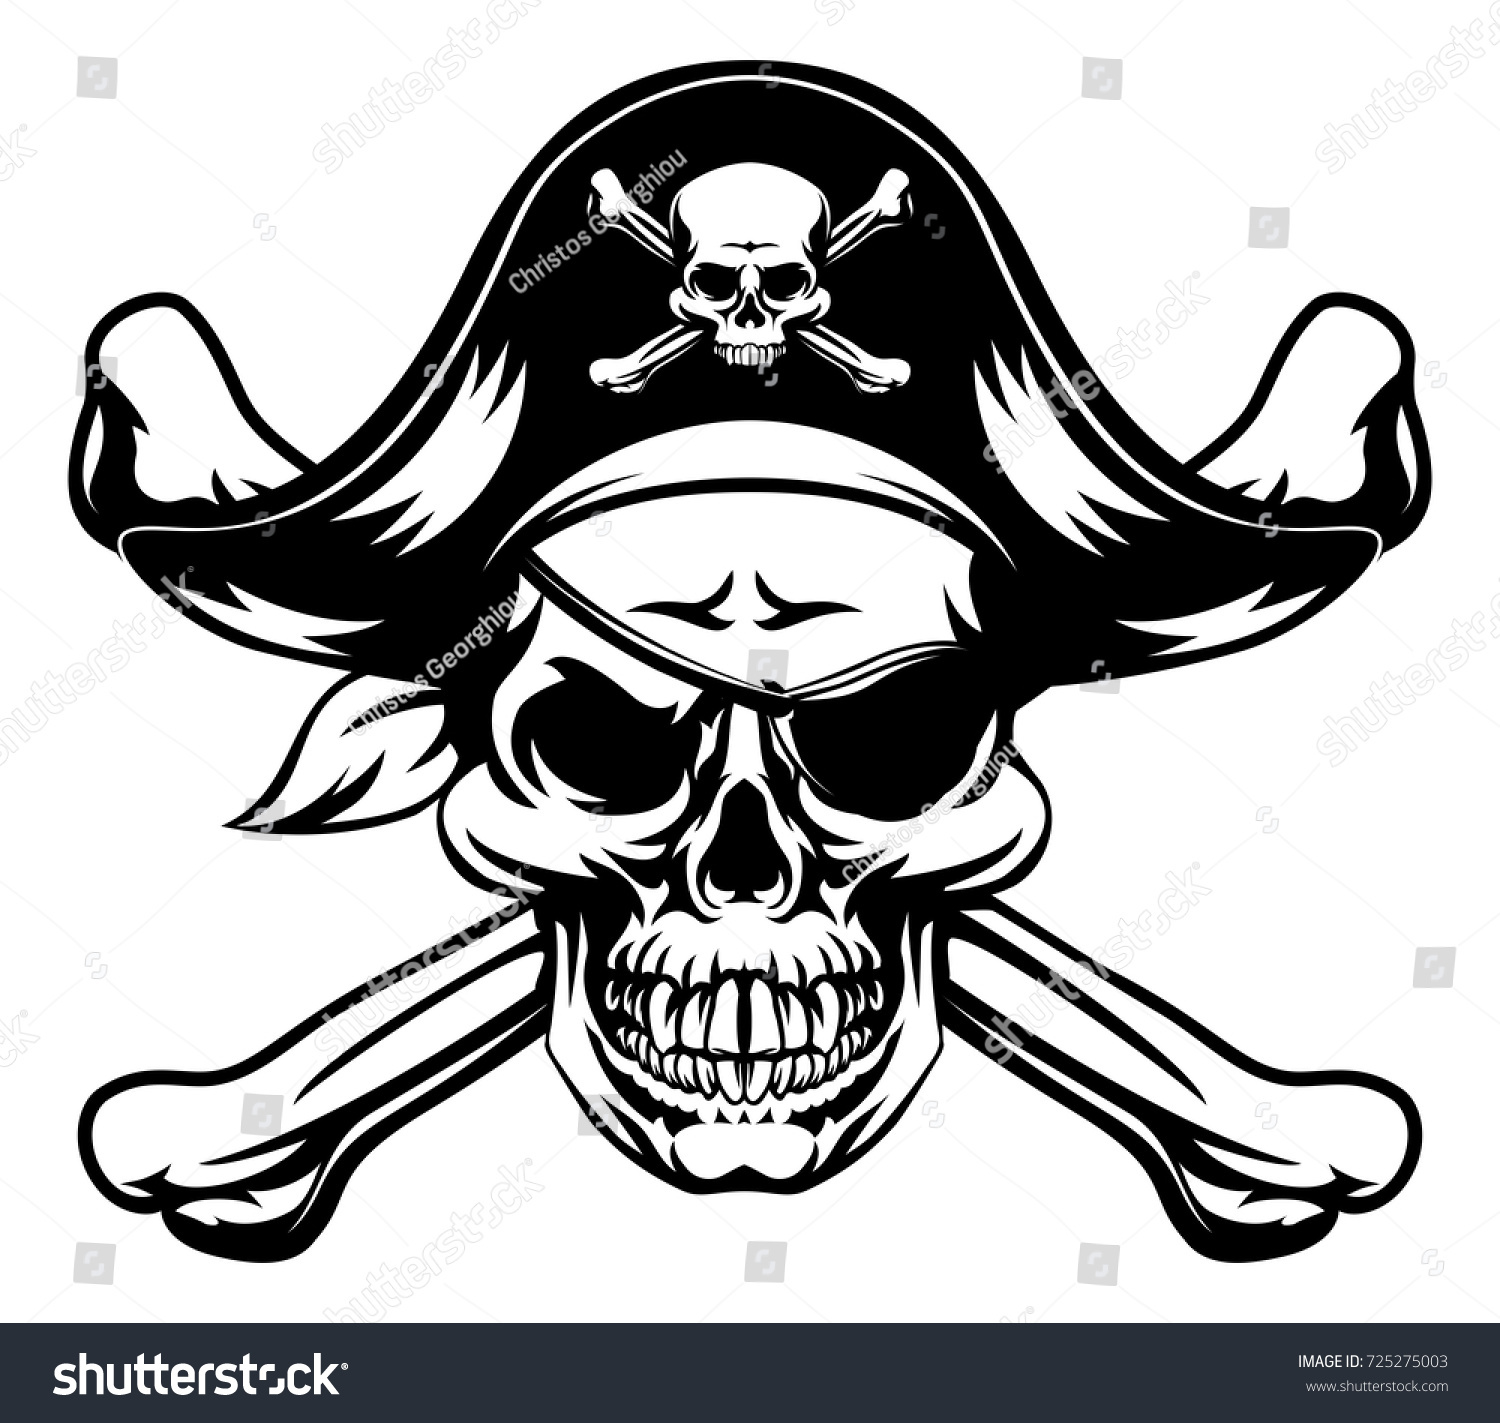 SVG of A skull and crossbones dressed as a pirate with hat and eye patch svg